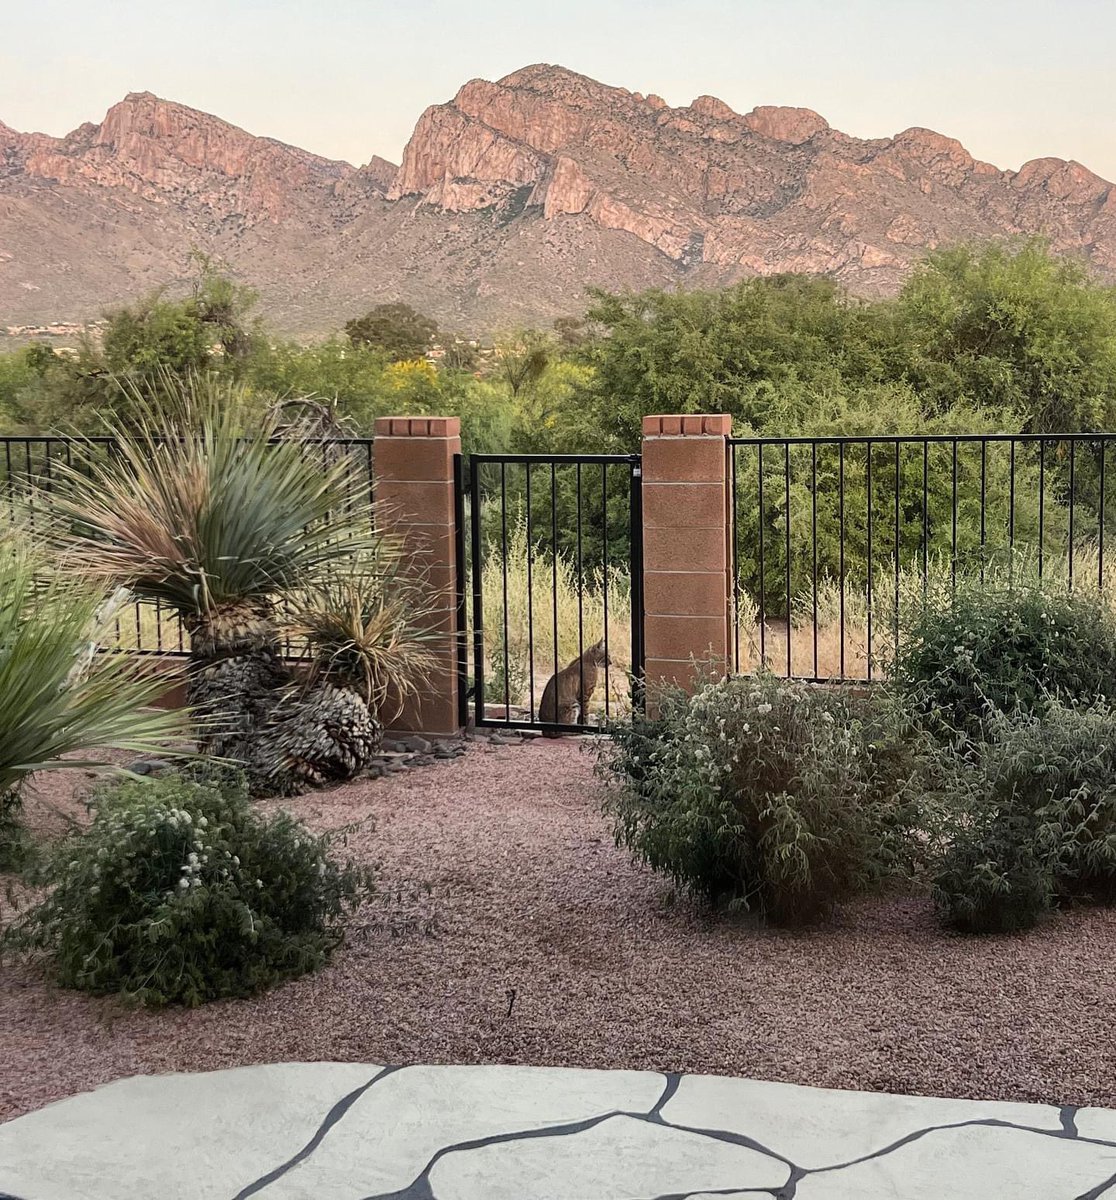 The resident bobcat appears again! Thanks little feline for continuing to choose my yard..I could watch you all day. 🤎
••••••••
#bobcat #wildcat #spiritanimal #blessed #wildlife #wildlifewednesday #tucsonliving #desertlife #whyilovewhereilive #tucson #arizona